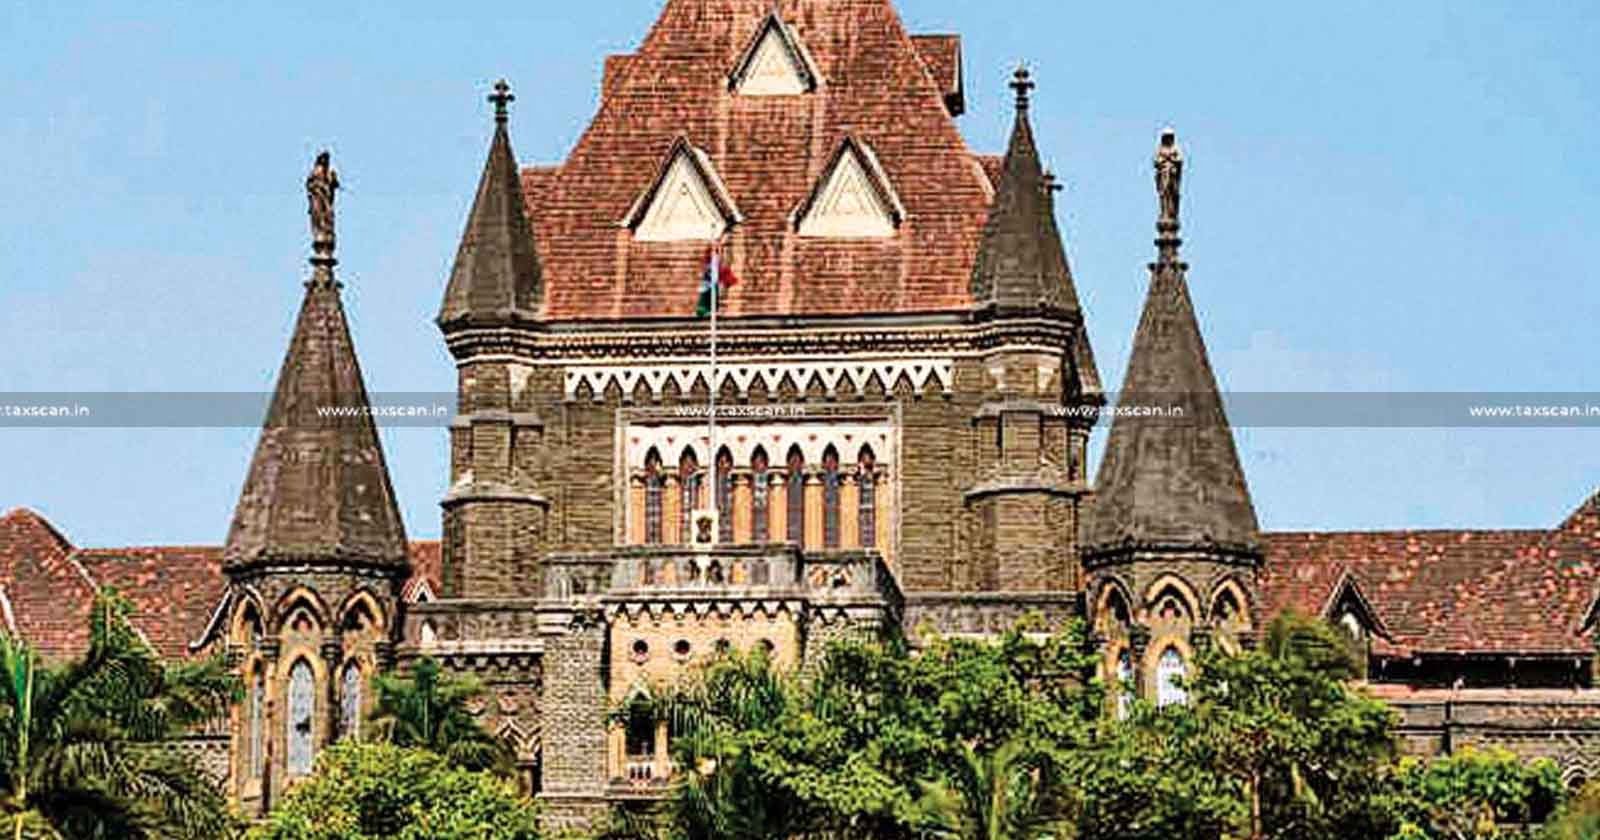 Bombay HC Stays Customs Demand - Bombay High Court - Customs Demand - customs - Demand - Pending of Review Petition - Supreme Court - Canon India case - Taxscan